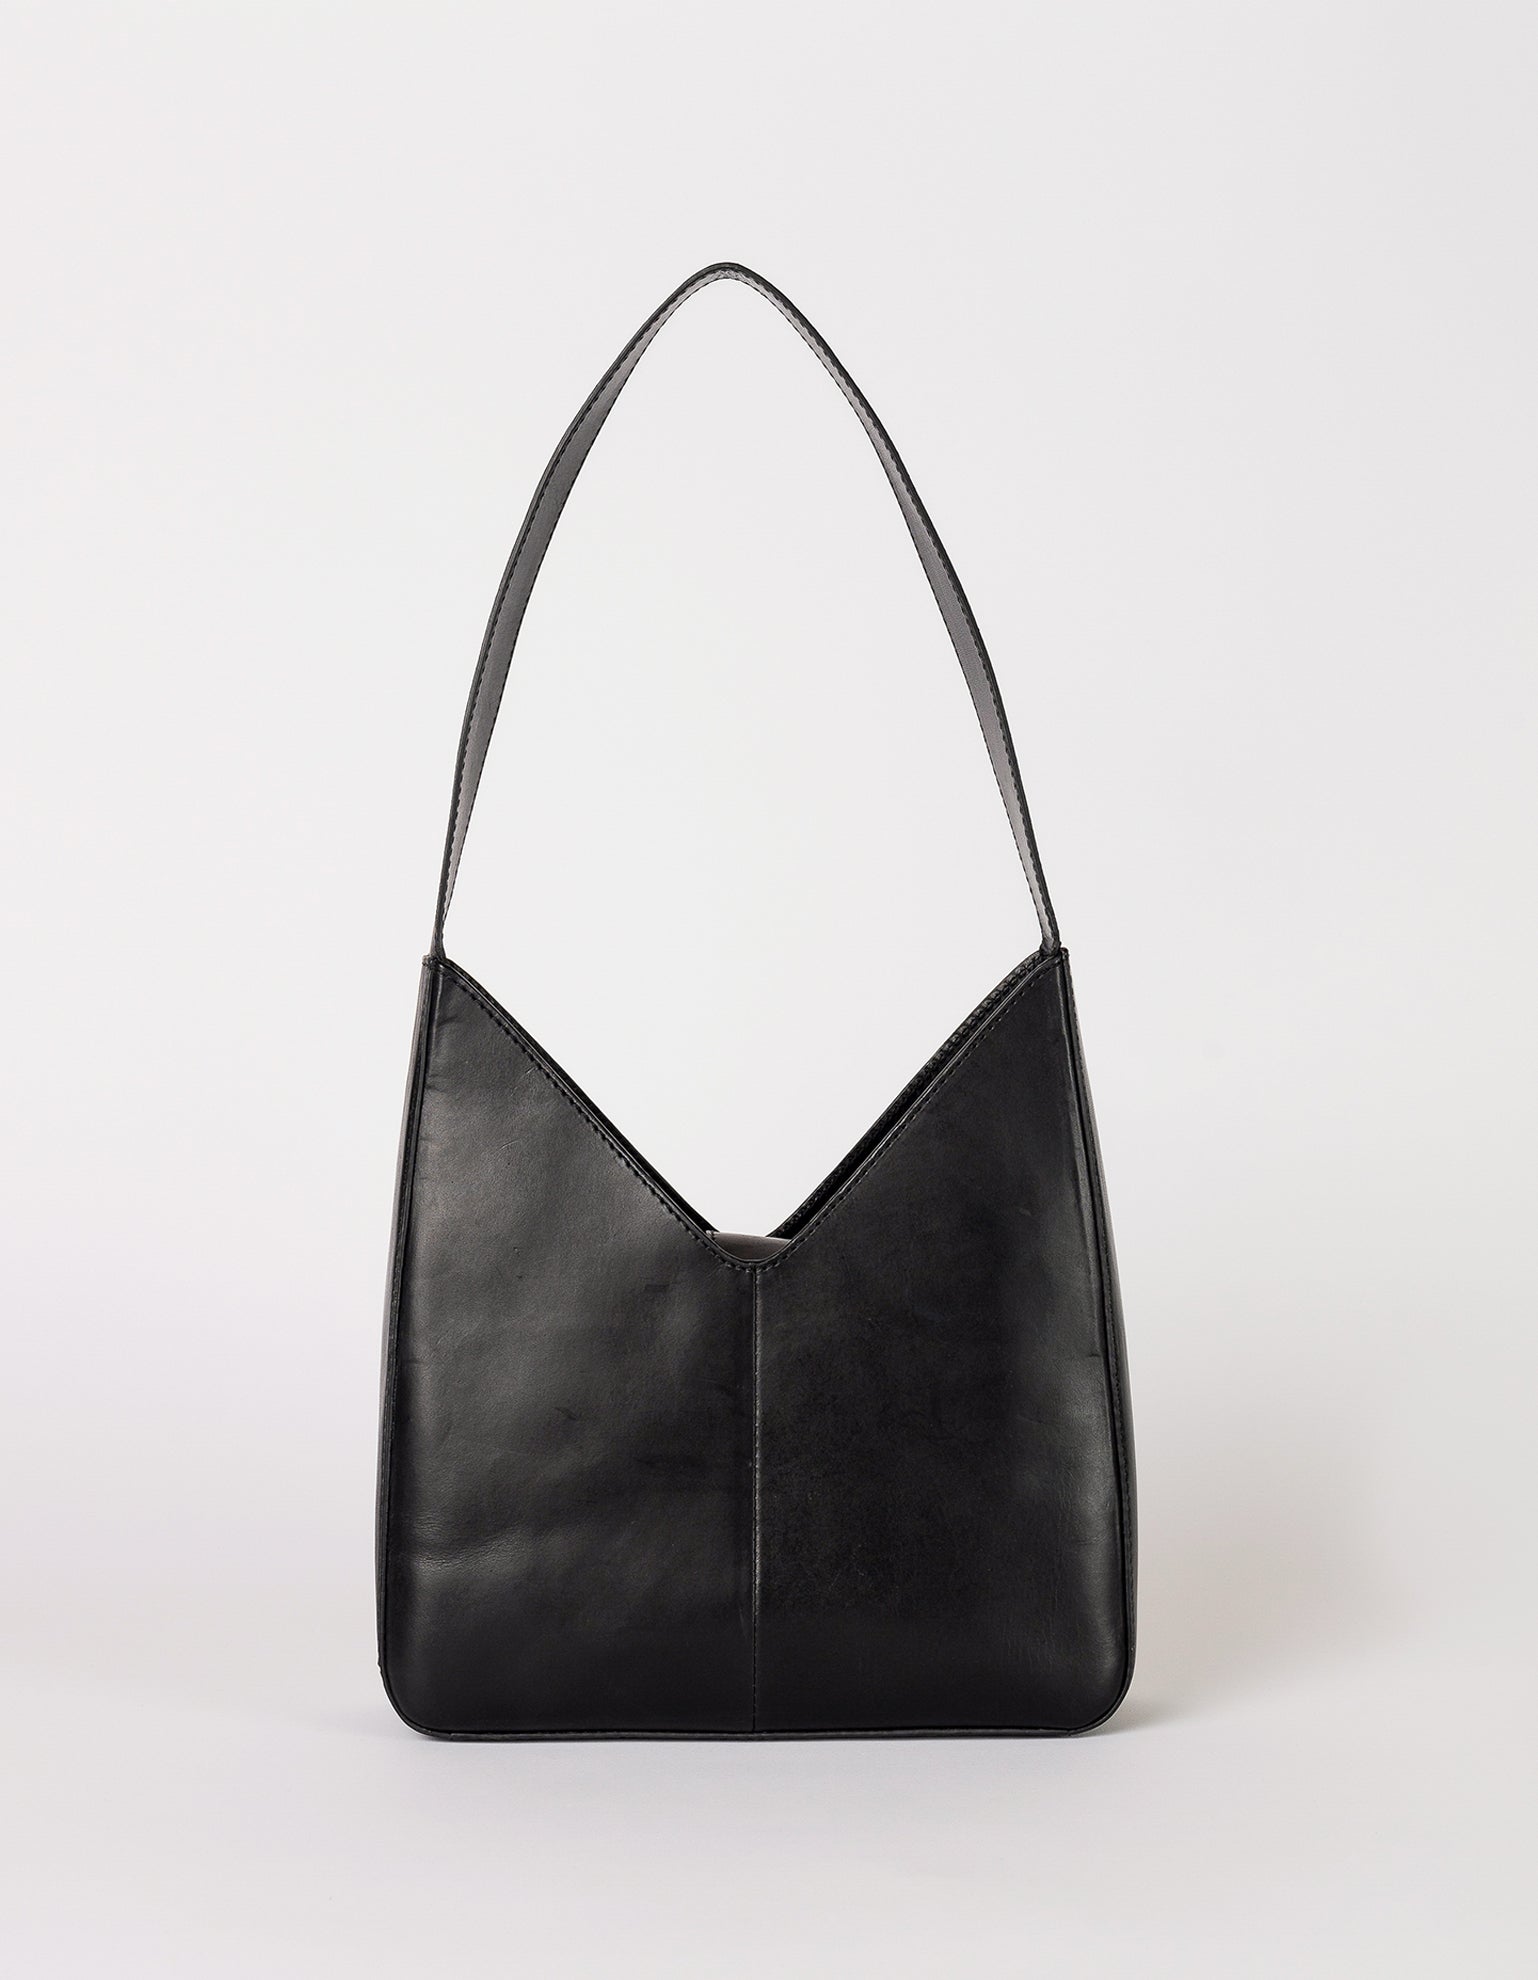 Vicky bag in black classic leather - back view 